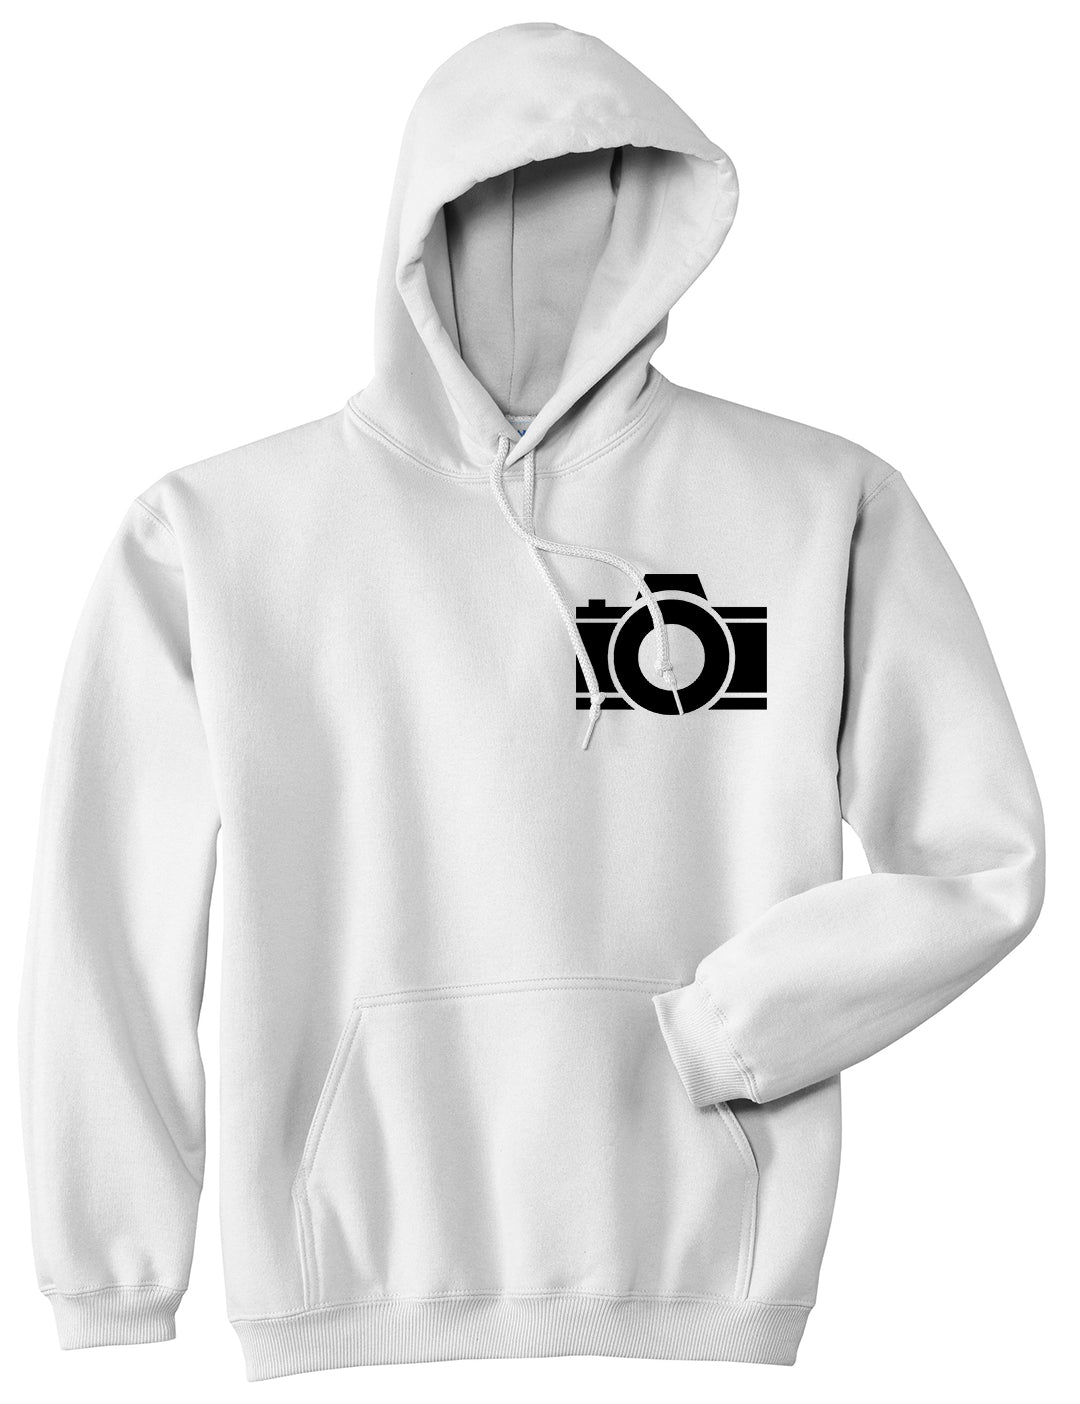 Camera Photographer Chest White Pullover Hoodie by Kings Of NY